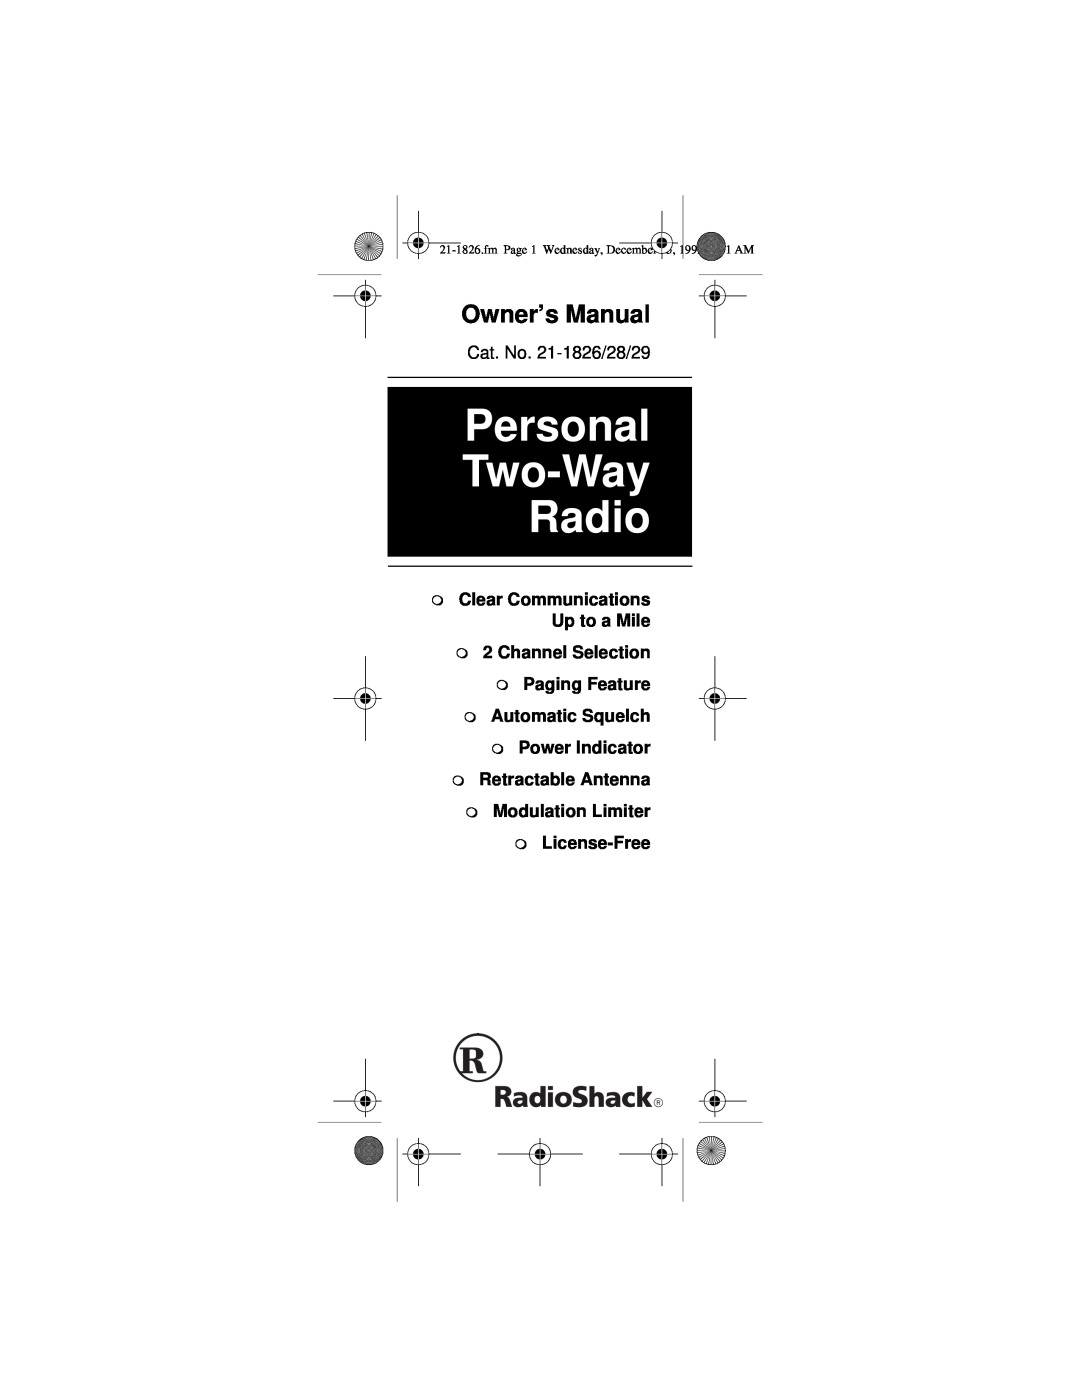 Rosewill owner manual Personal Two-Way Radio, Owner’s Manual, Cat. No. 21-1826/28/29, Modulation Limiter License-Free 